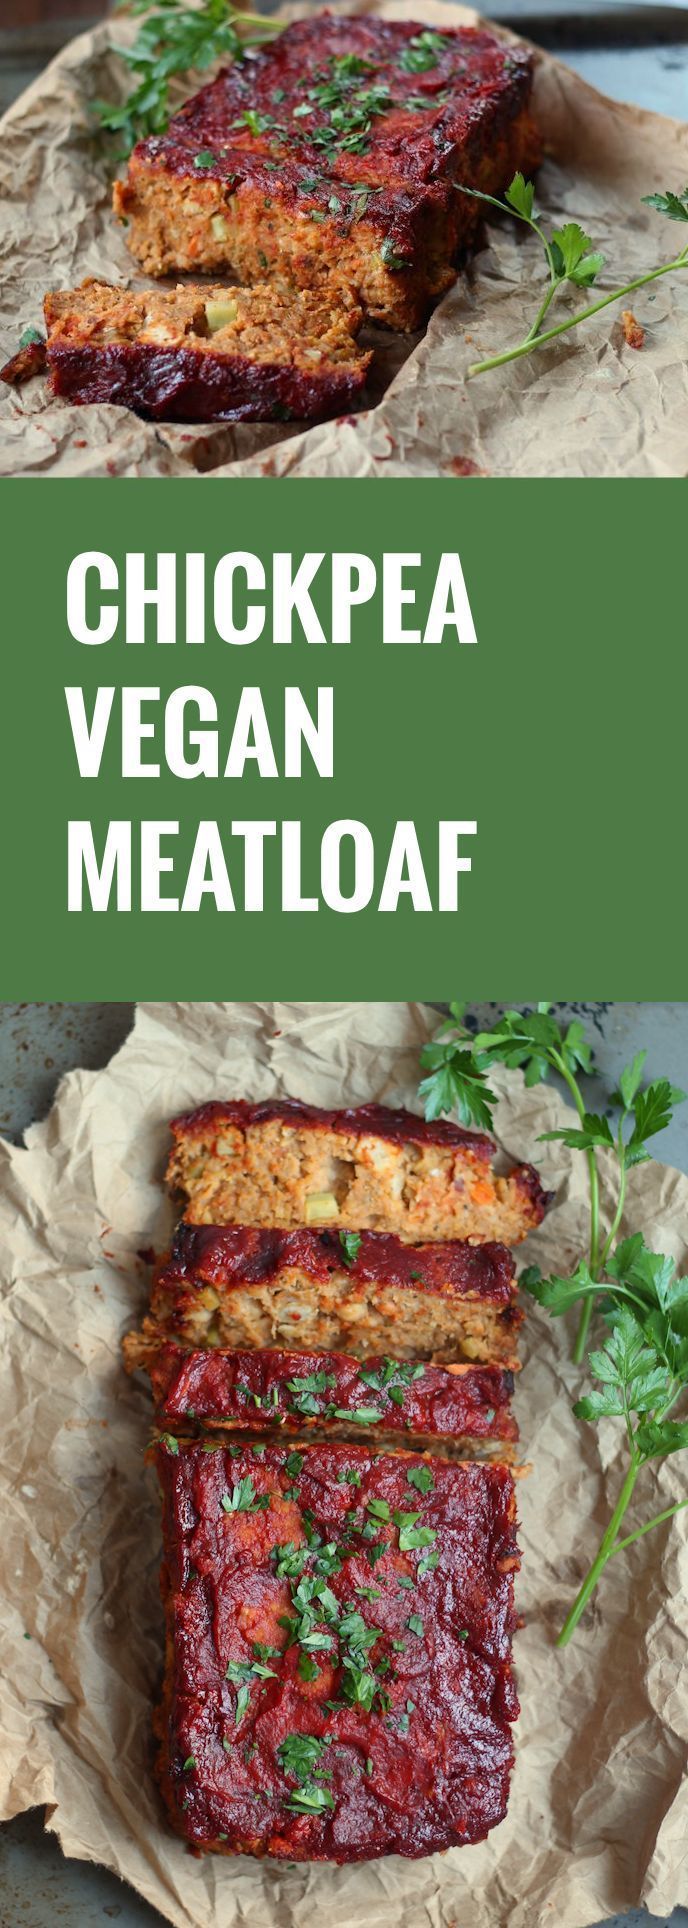 This hearty vegan meatloaf is made from a base of seasoned chickpeas, baked up to perfection and topped with a flavorful tomato glaze. -   24 vegan recipes dinner
 ideas